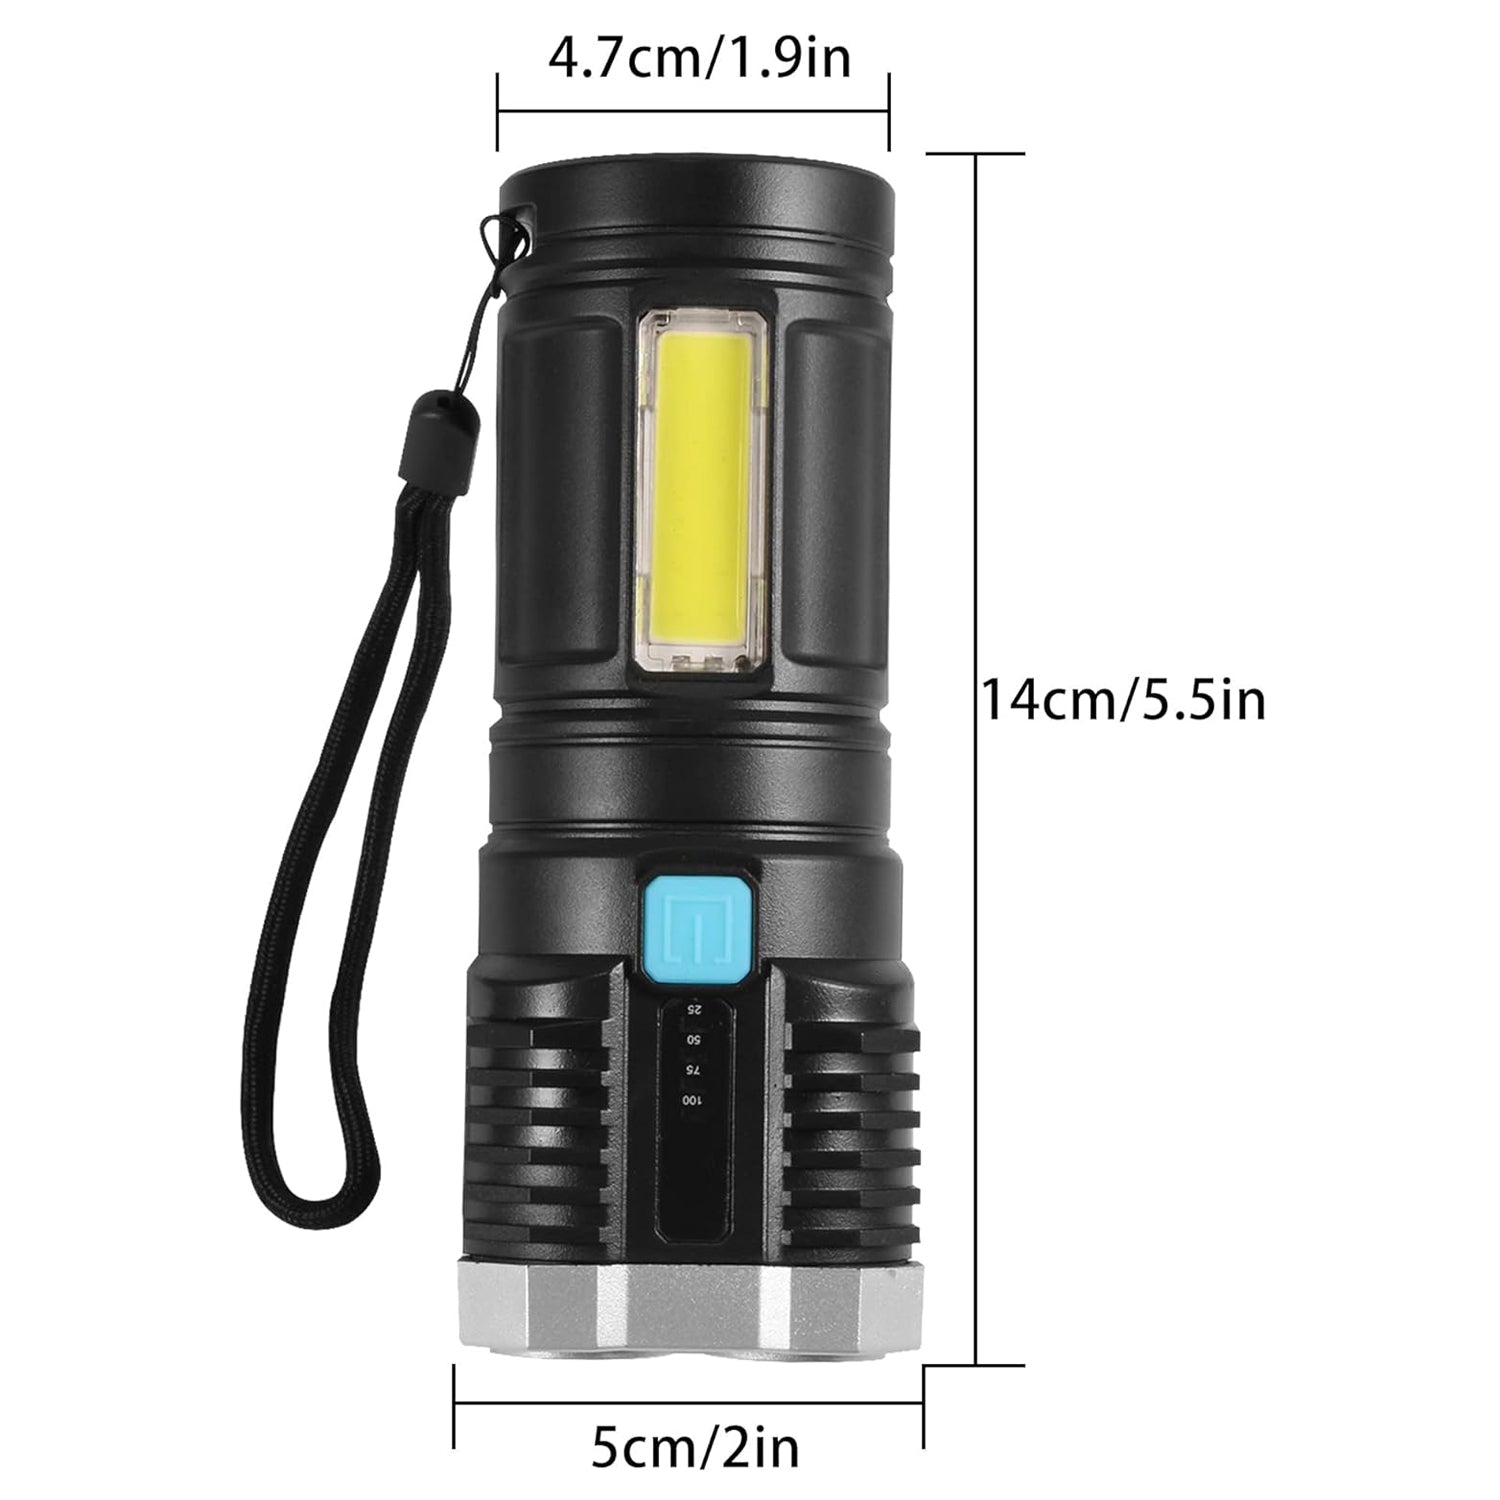 9370 Multifunctional Strong 4 LED Torch Light, Portable Rechargeable Flashlight Long Distance Beam Range 800 Lumens COB Light 4 Mode Emergency for Hiking, Walking, Camping (4 LED Torch)